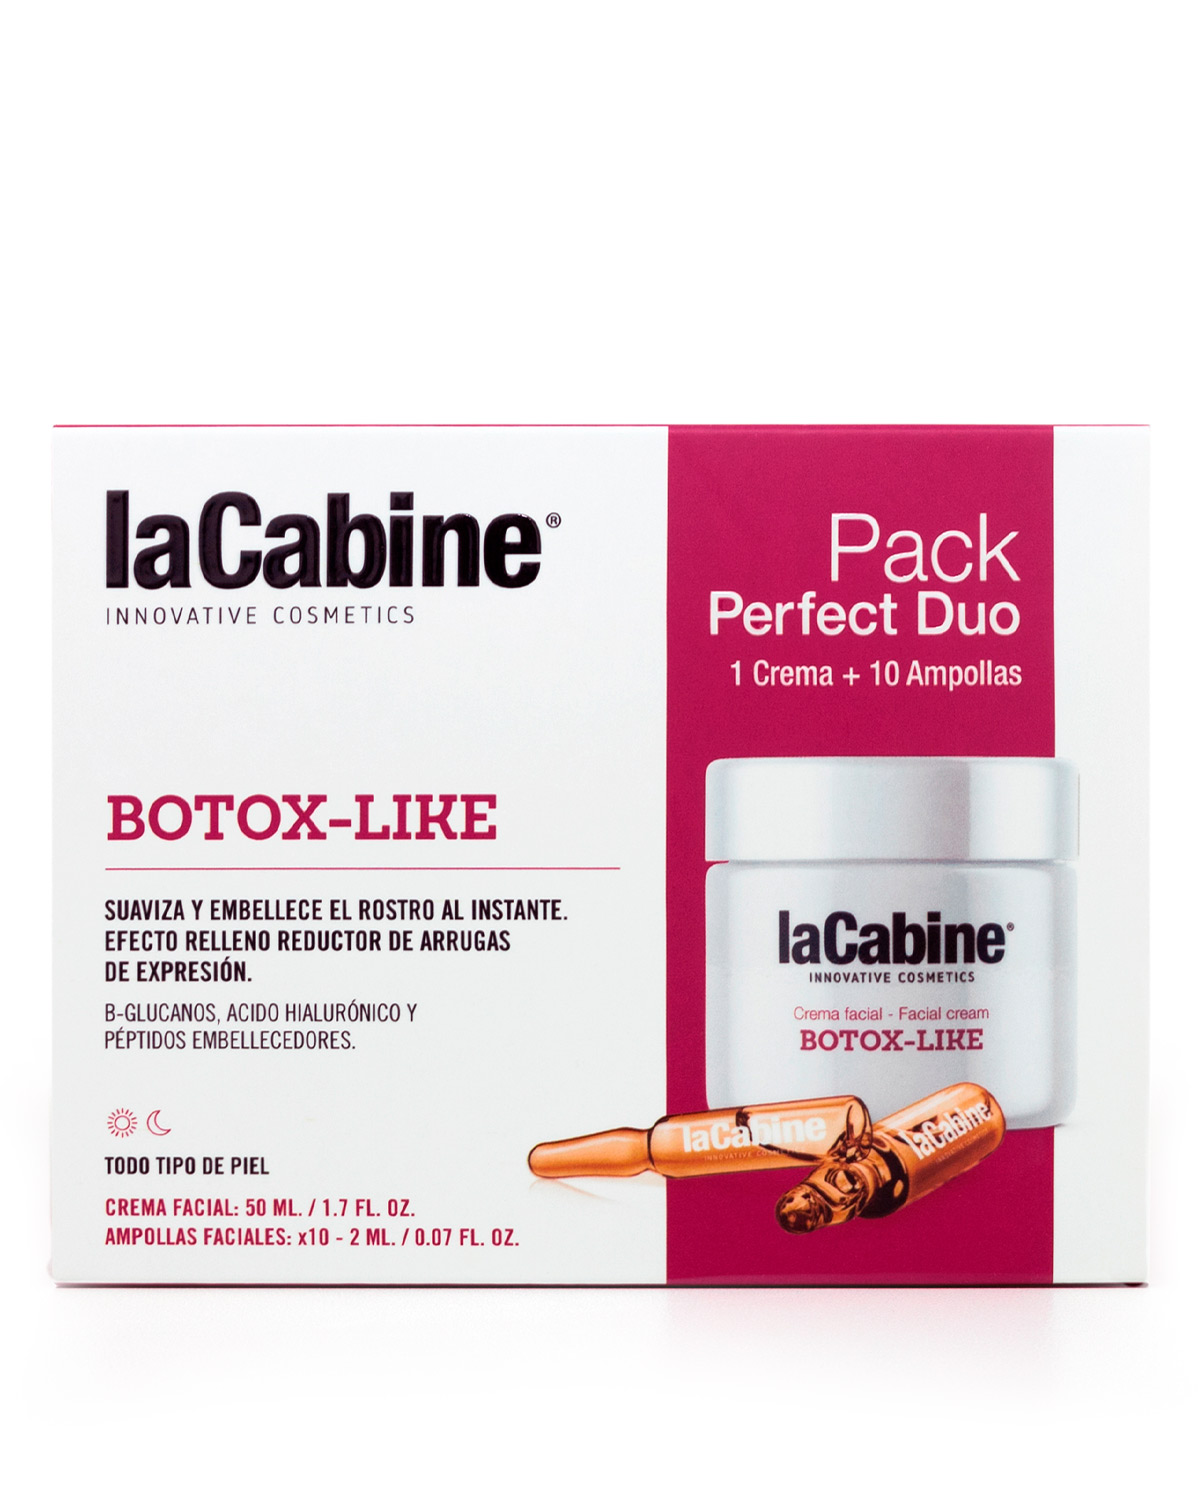 BOTOX-LIKE-LACABINE-PACK-PERFECT-DUO-AMPOLLAS-CREMA1